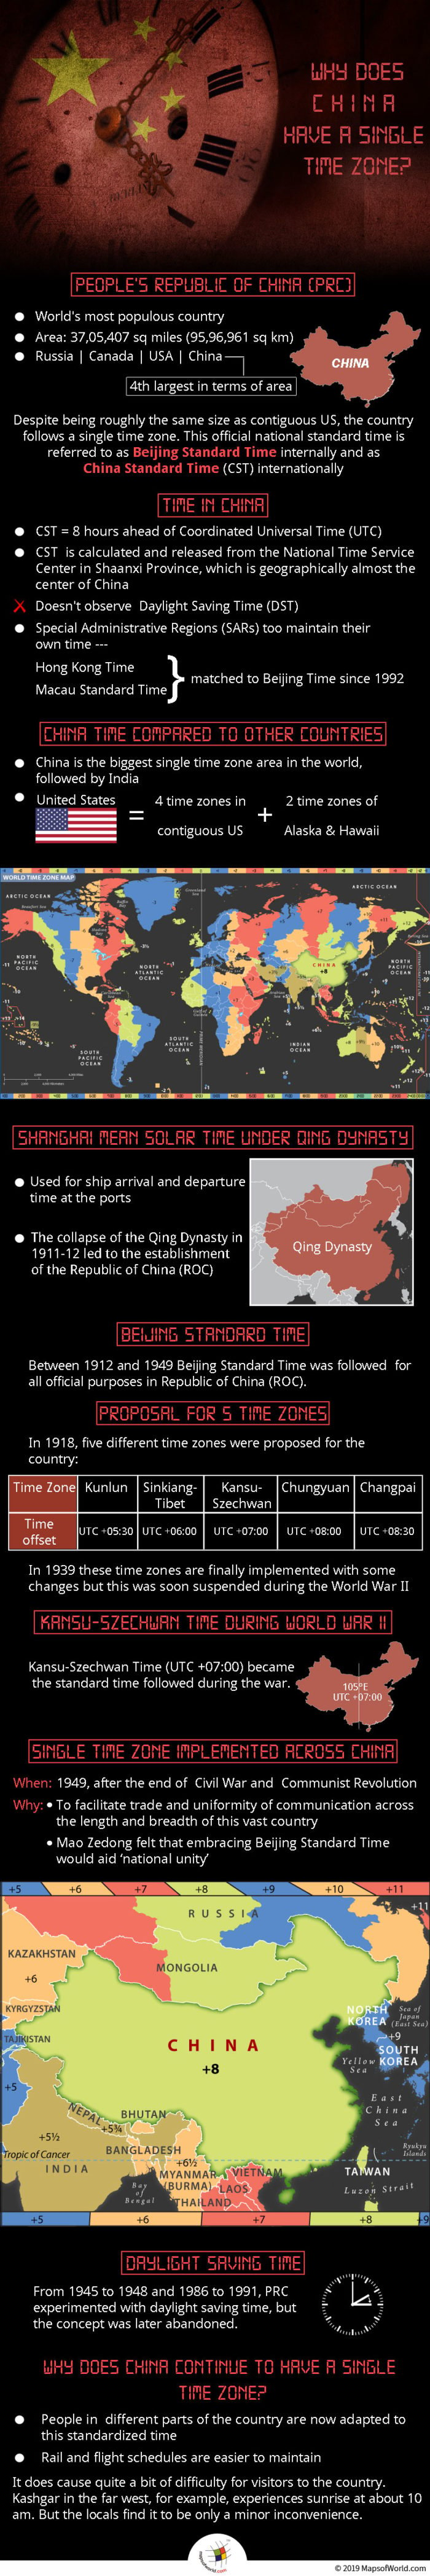 Infographic - Why Does China Have a Single Time Zone?